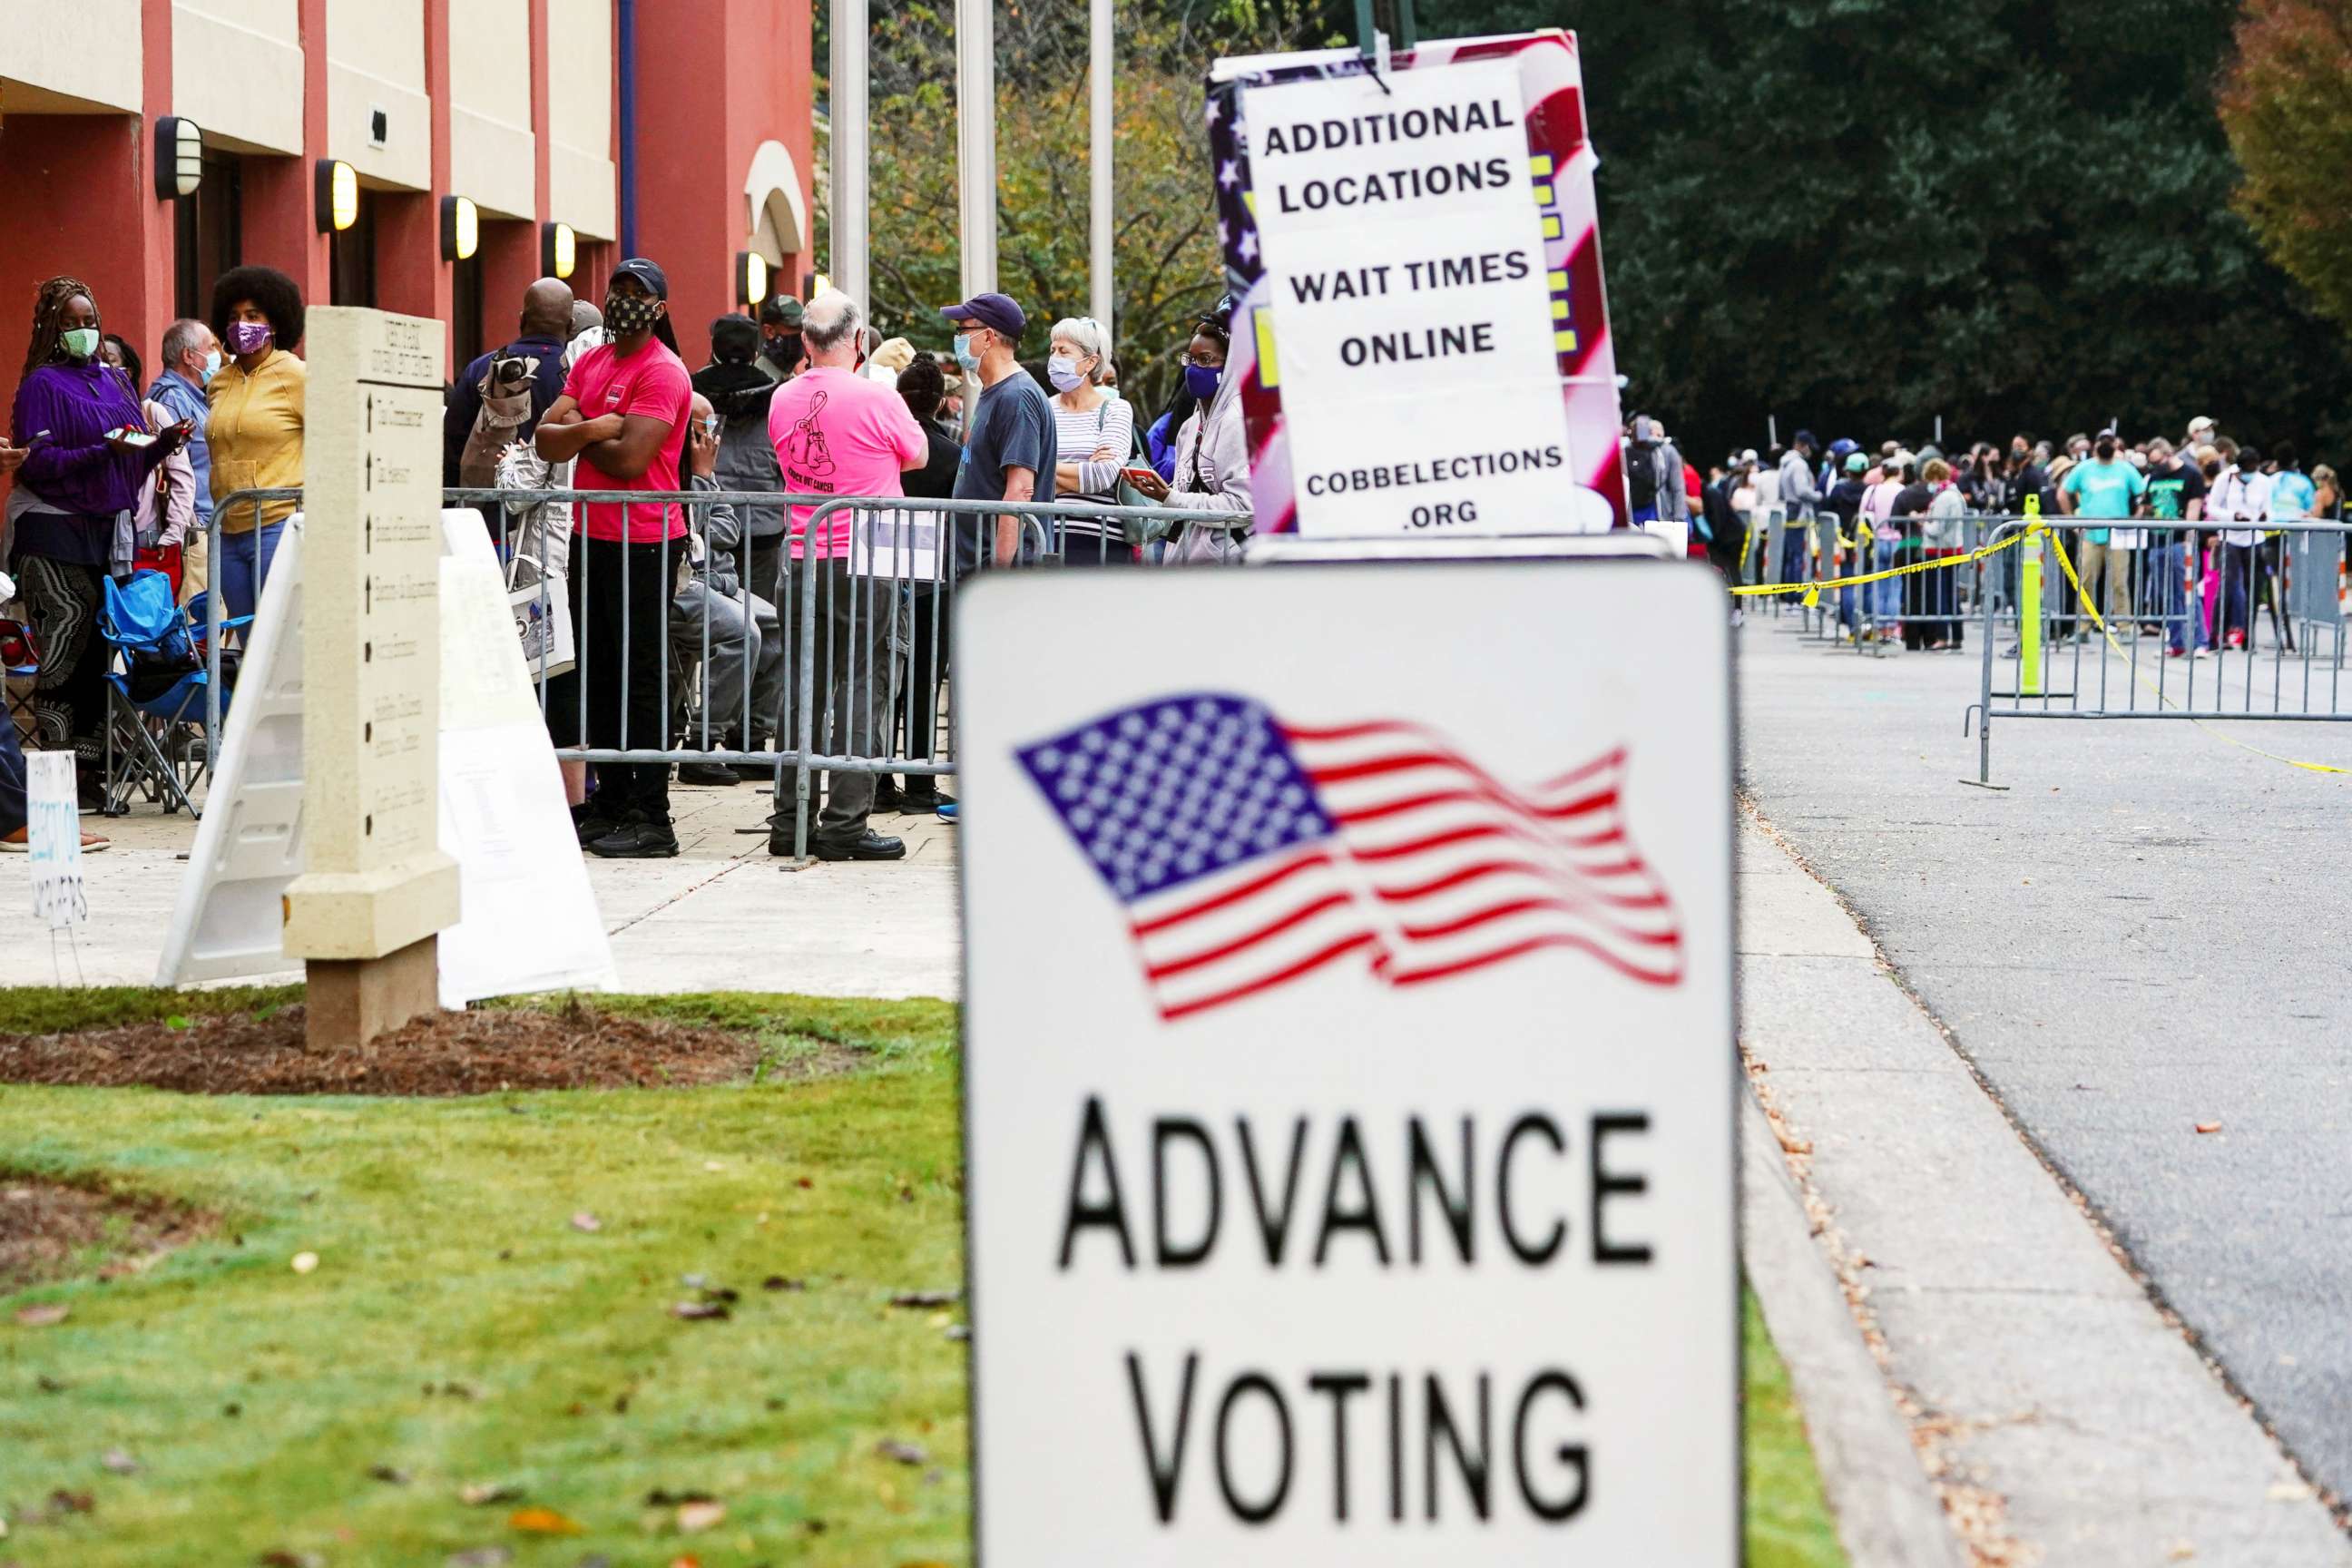 PHOTO: Voters line up to cast their election ballot at a Cobb County polling station during early voting in Marietta, Ga., Oct. 13, 2020.